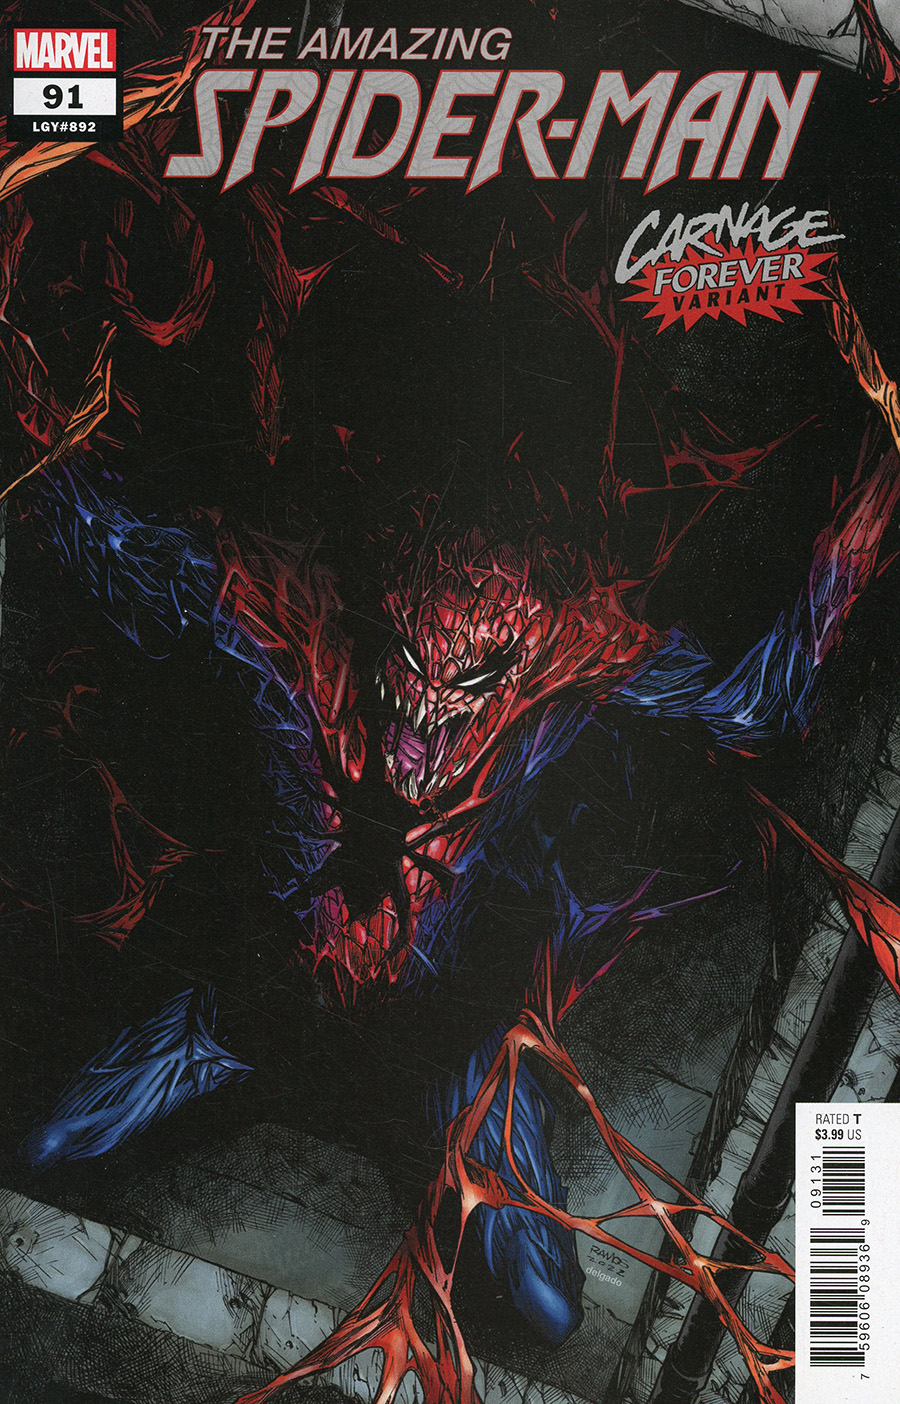 Amazing Spider-Man Vol 5 #91 Cover B Variant Humberto Ramos Carnage Forever Cover